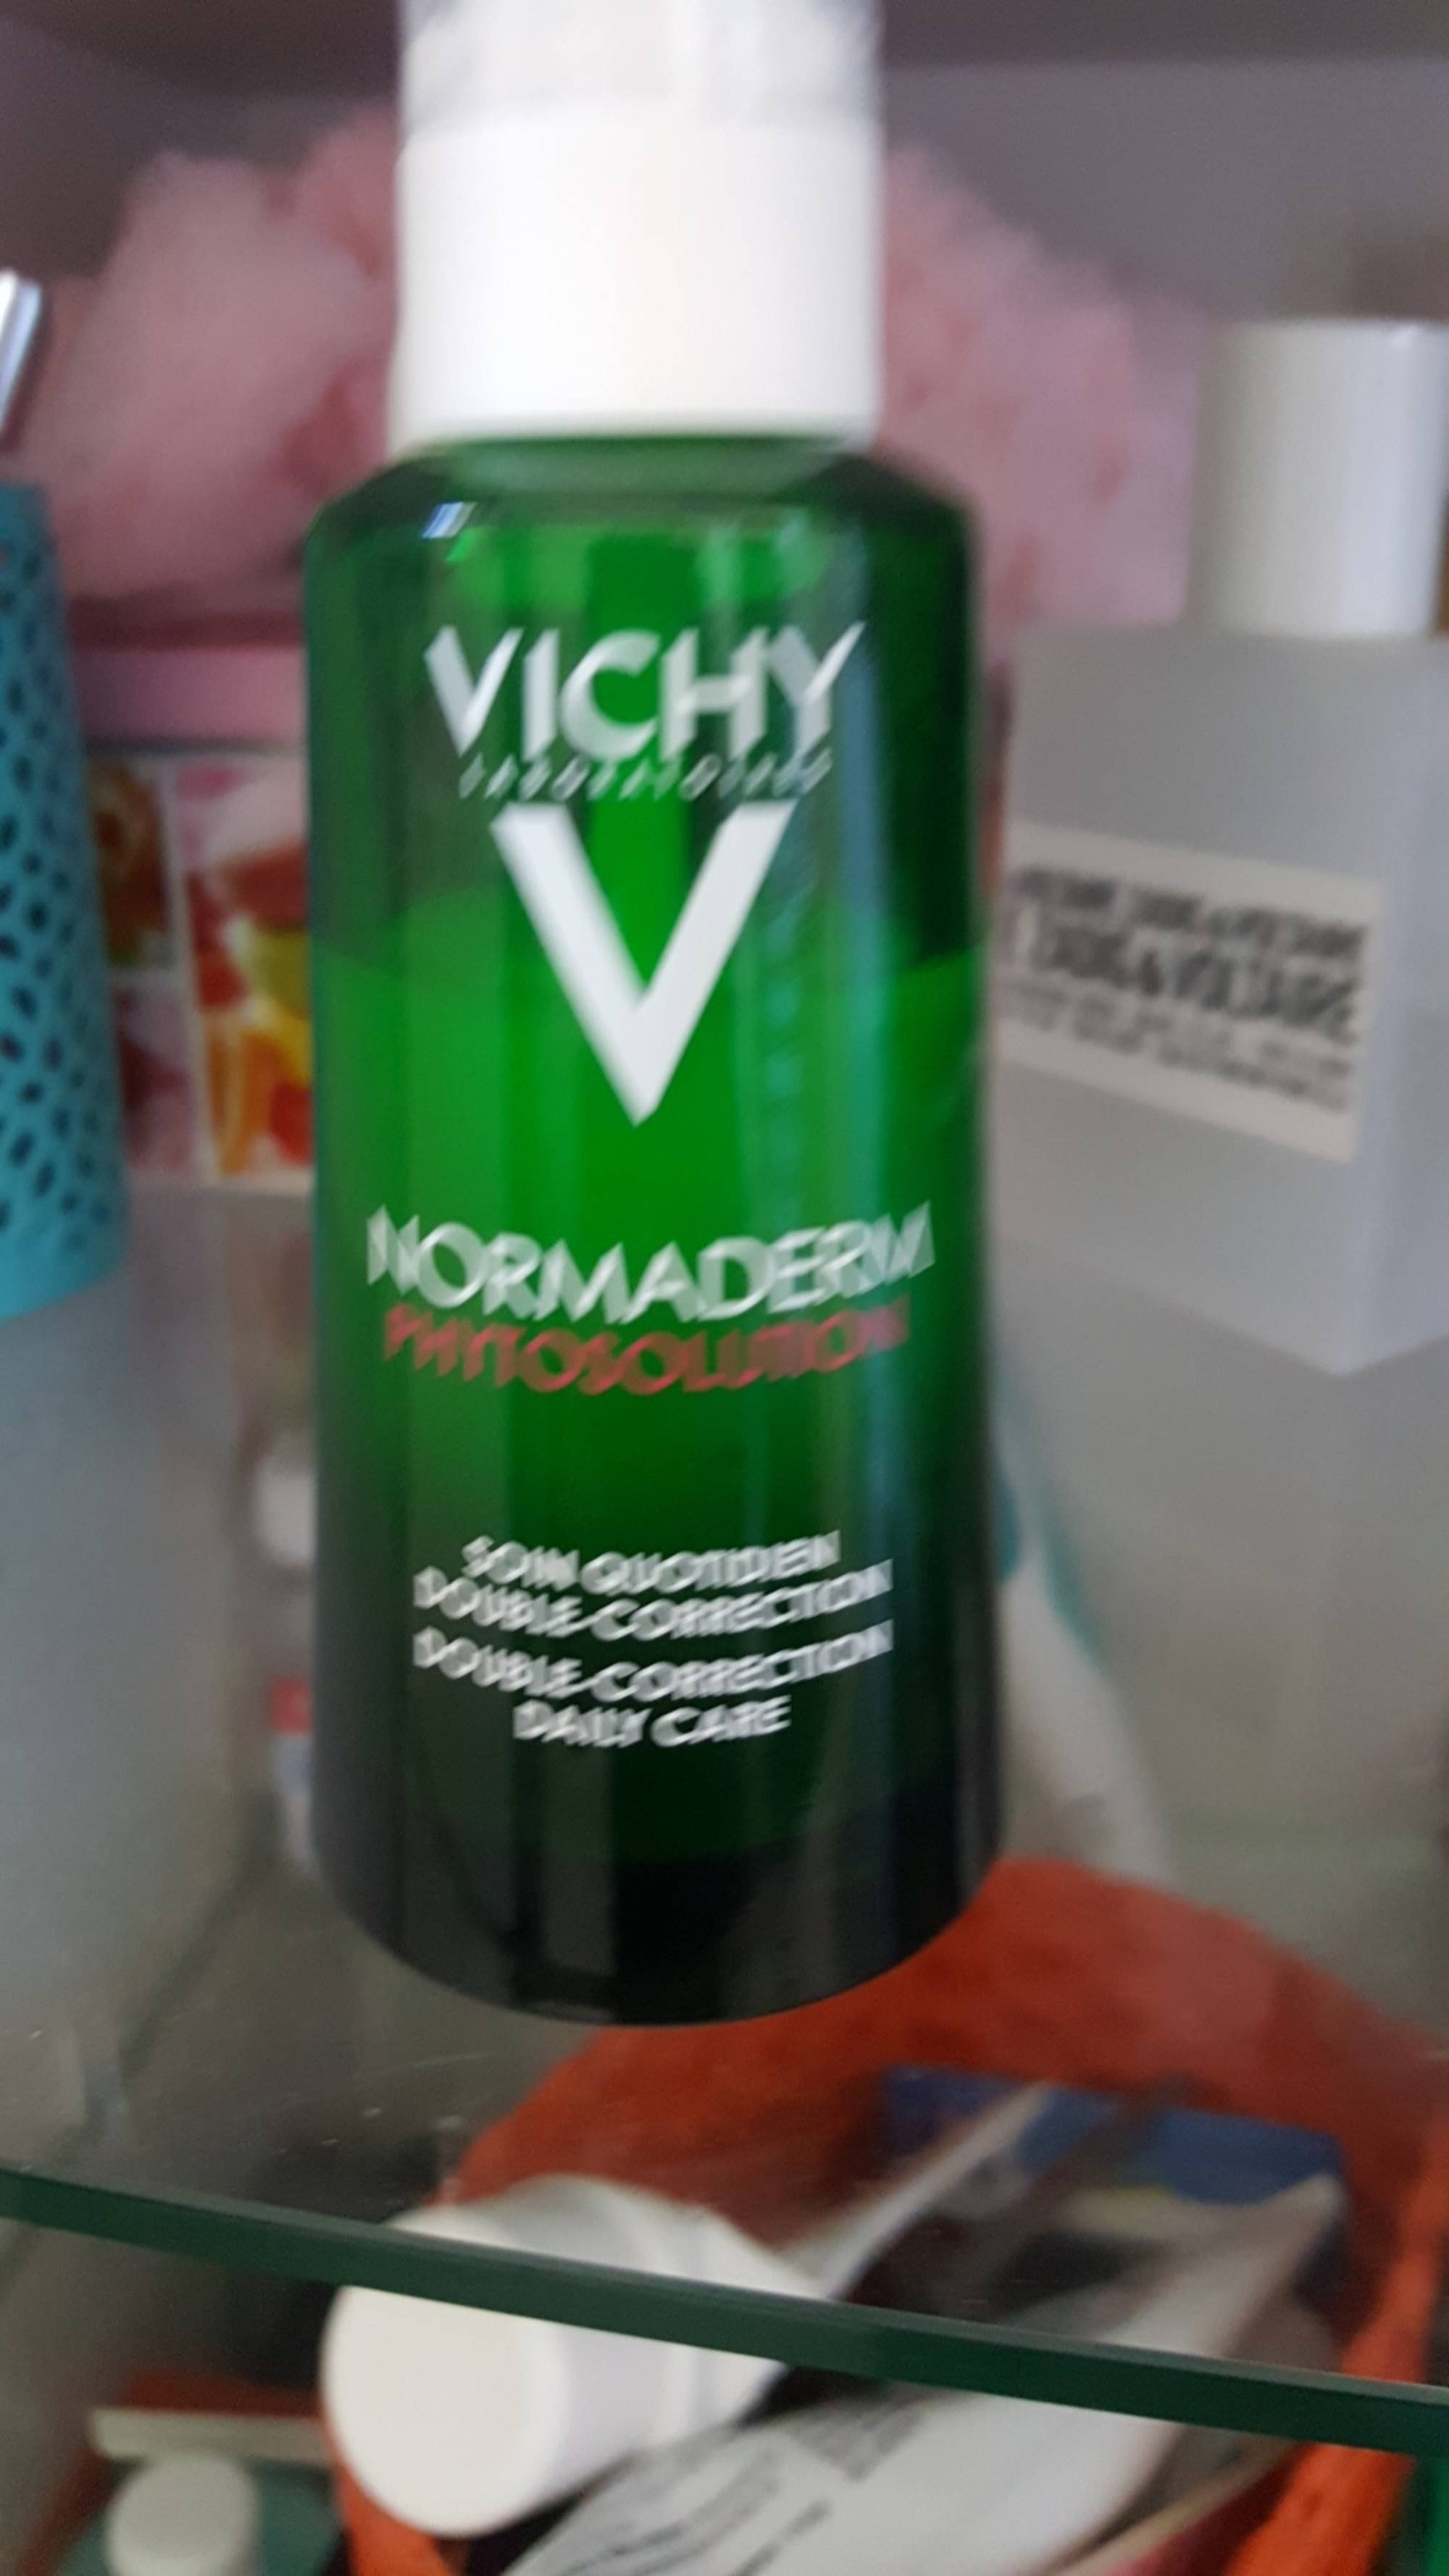 VICHY - Normaderm phytosolution - Soin quotidien double correction